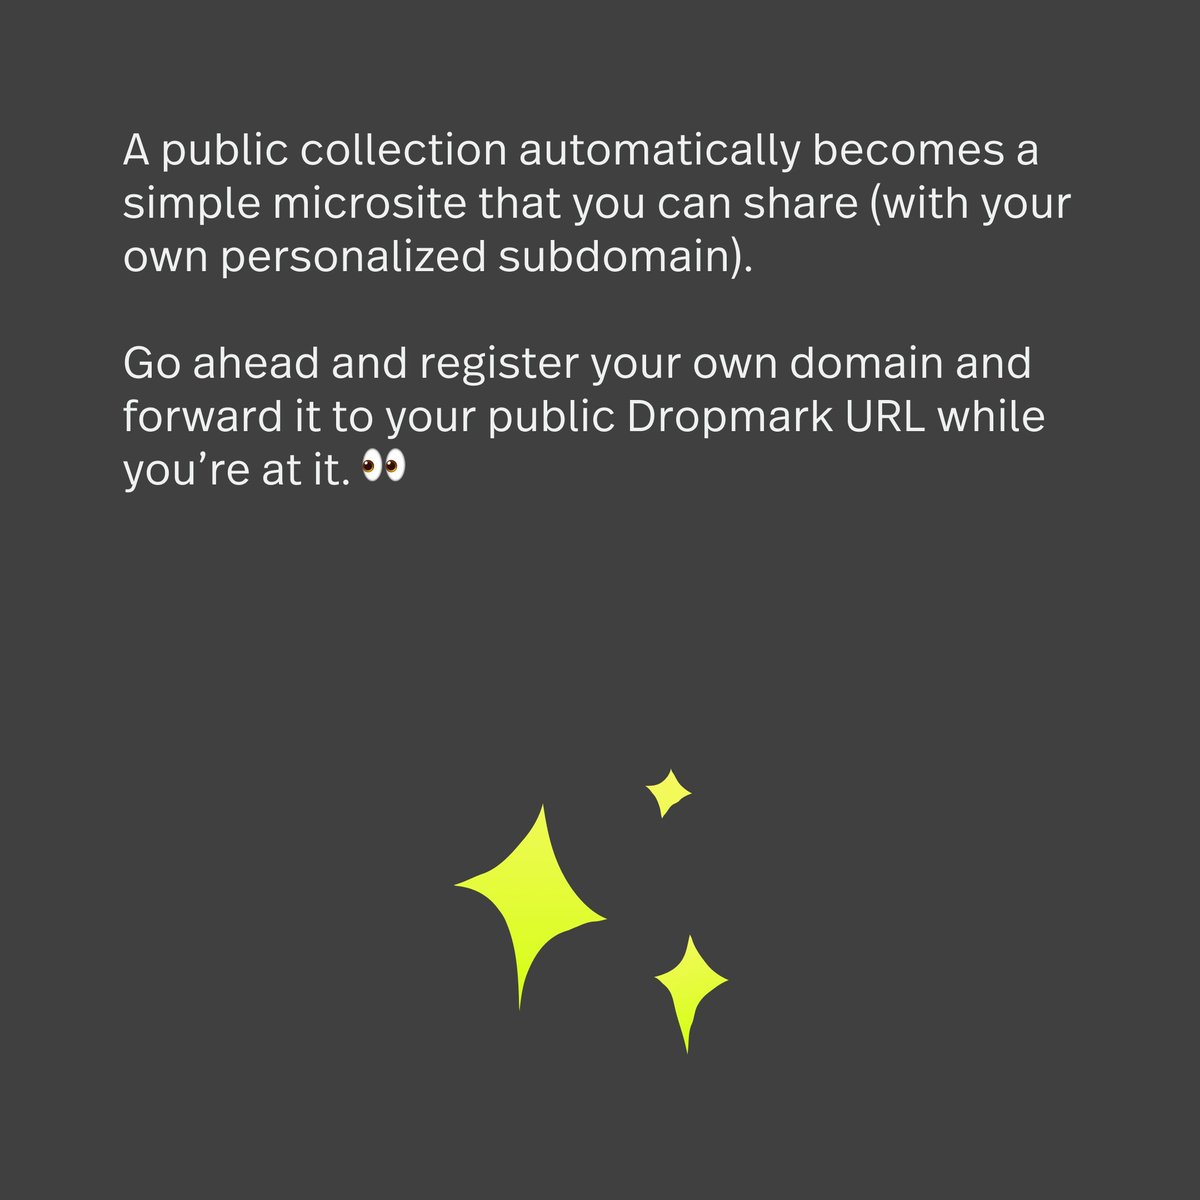 Hello no-code microsites! Use Dropmark to create super simple portfolios, a tv channel that auto plays through each ‘episode’, and more. Send us yours, we’d love to see how creative you are with your collections! Check out our own on microgaming: url.drp.mk/42Ec7b7